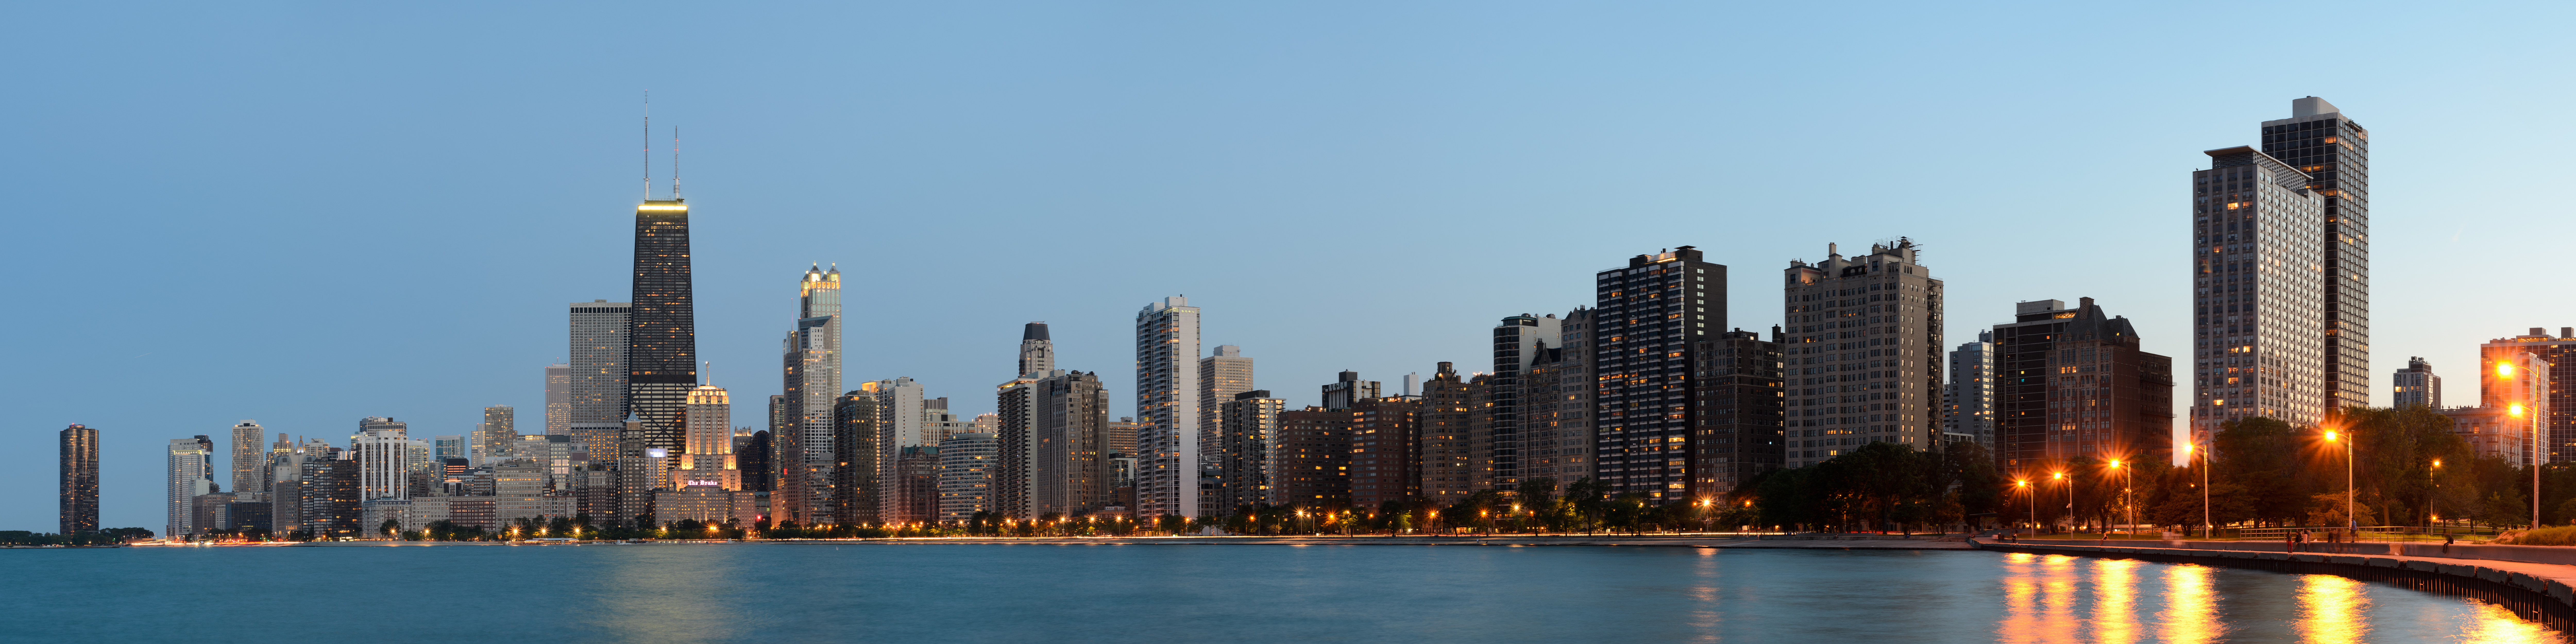 Chicago_from_North_Avenue_Beach_June_201